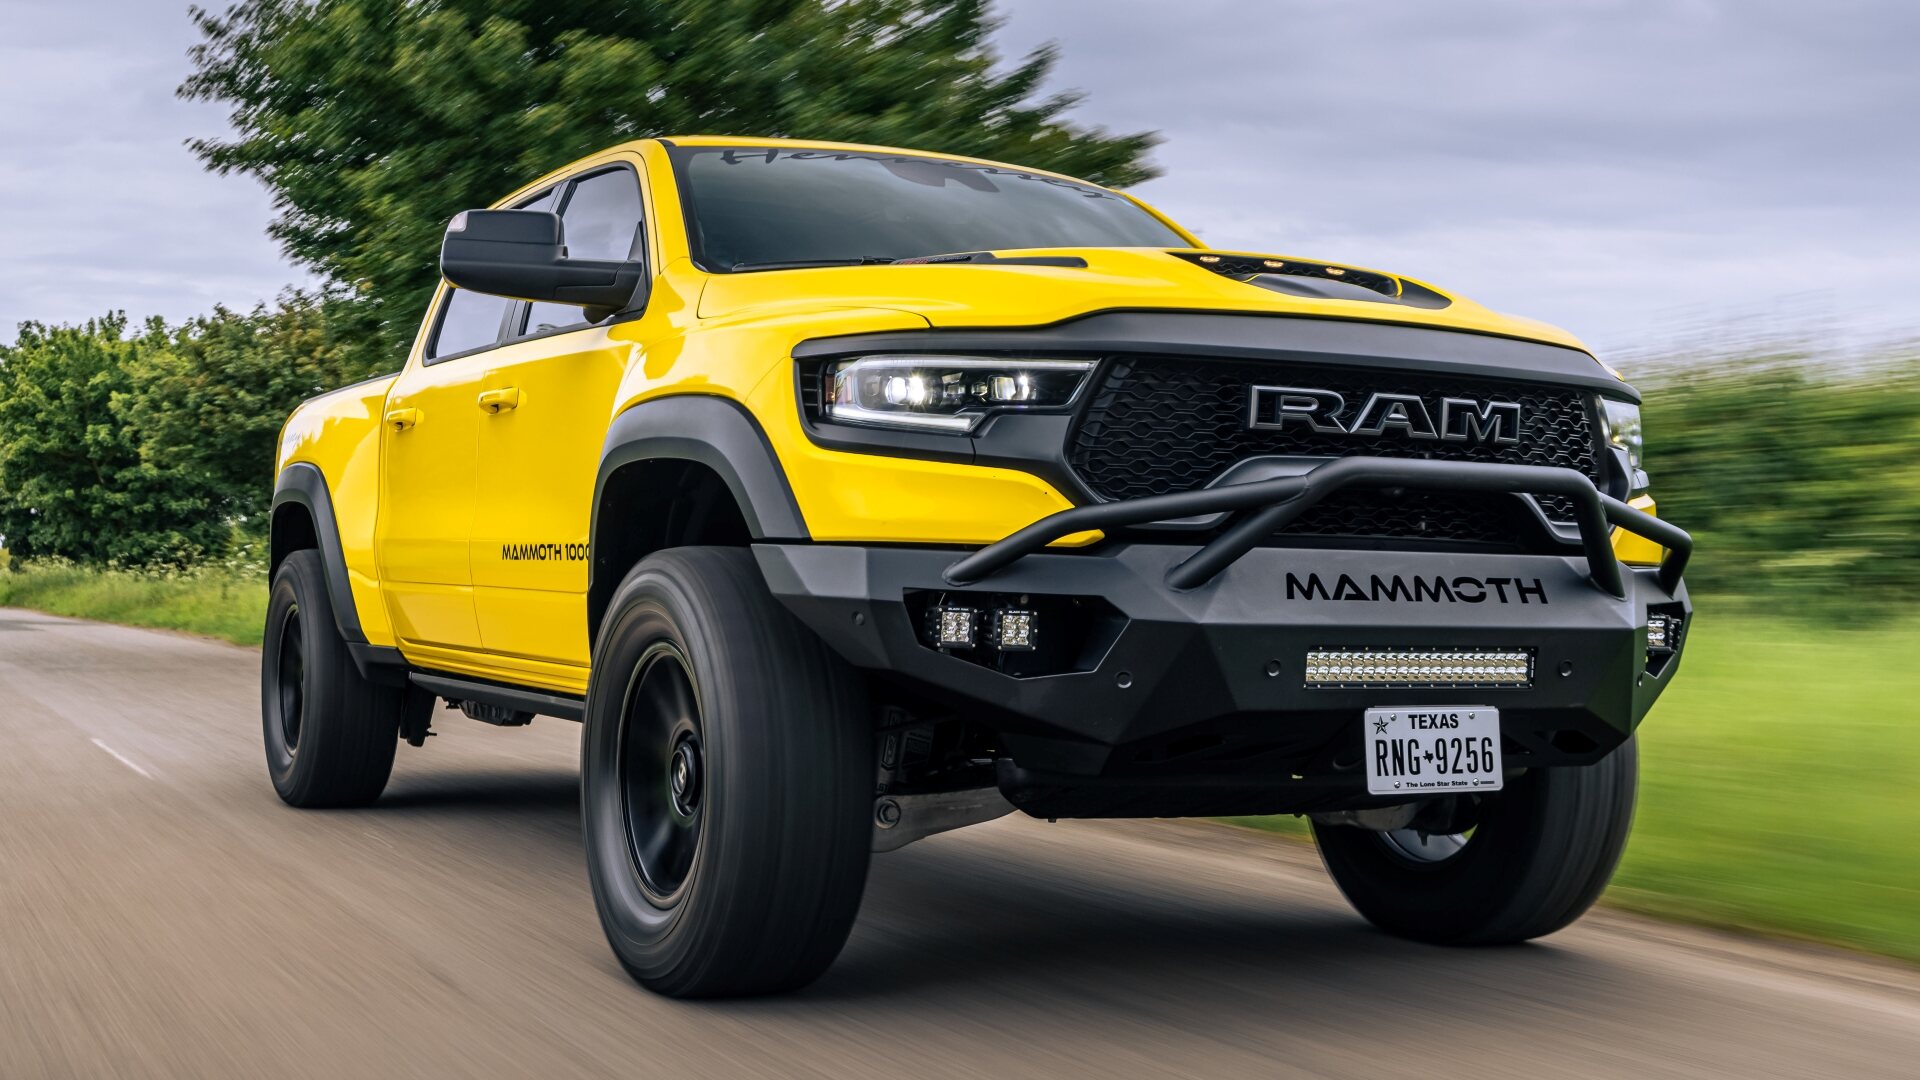 Presenting The Hennessey Mammoth 1000 TRX Last Stand The Ultimate Tribute To Ram's V-8 Era